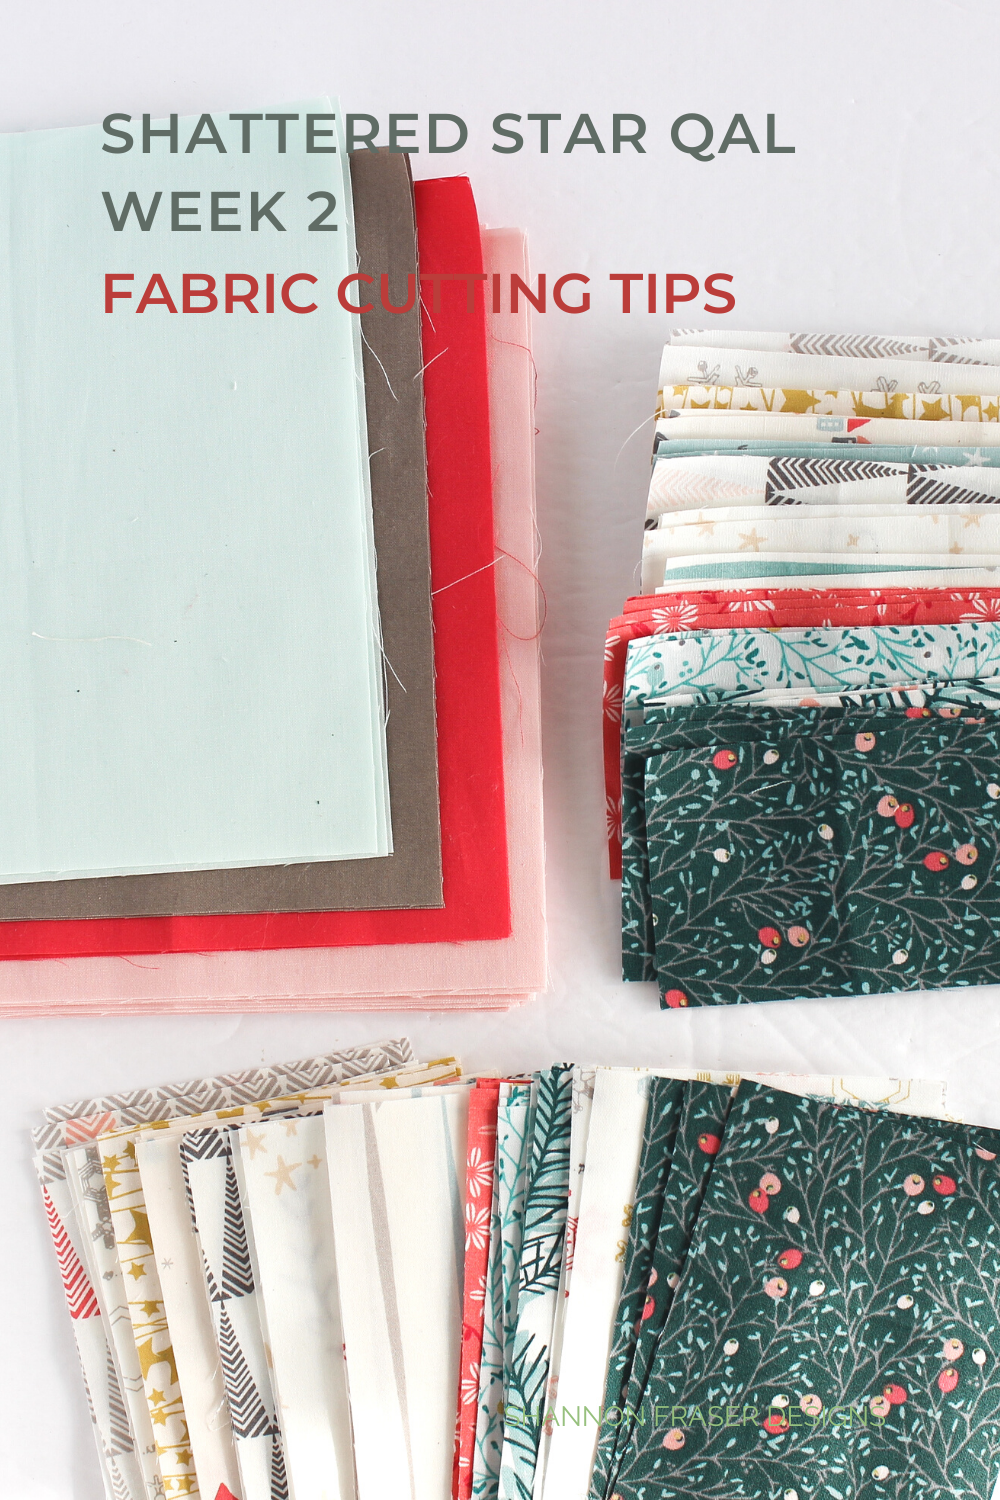 Quilt fabric cutting tips | Shattered Star Quilt Along Week 2 - Part 2: How to cut your fabric | Shannon Fraser Designs #quiltingtips